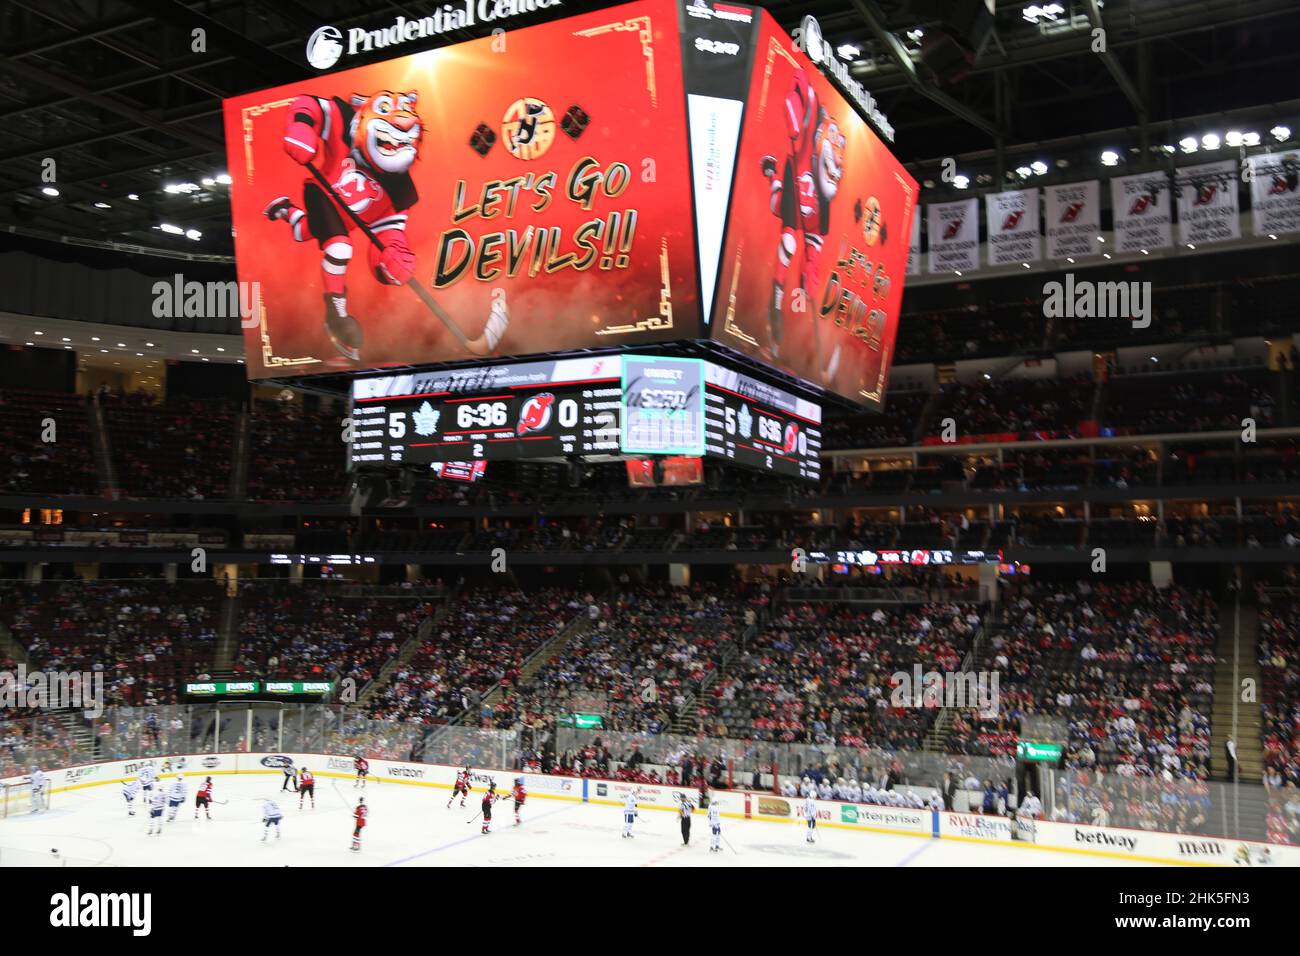 New Jersey Devils 4K Scoreboard Powered by Absen and Trans-Lux